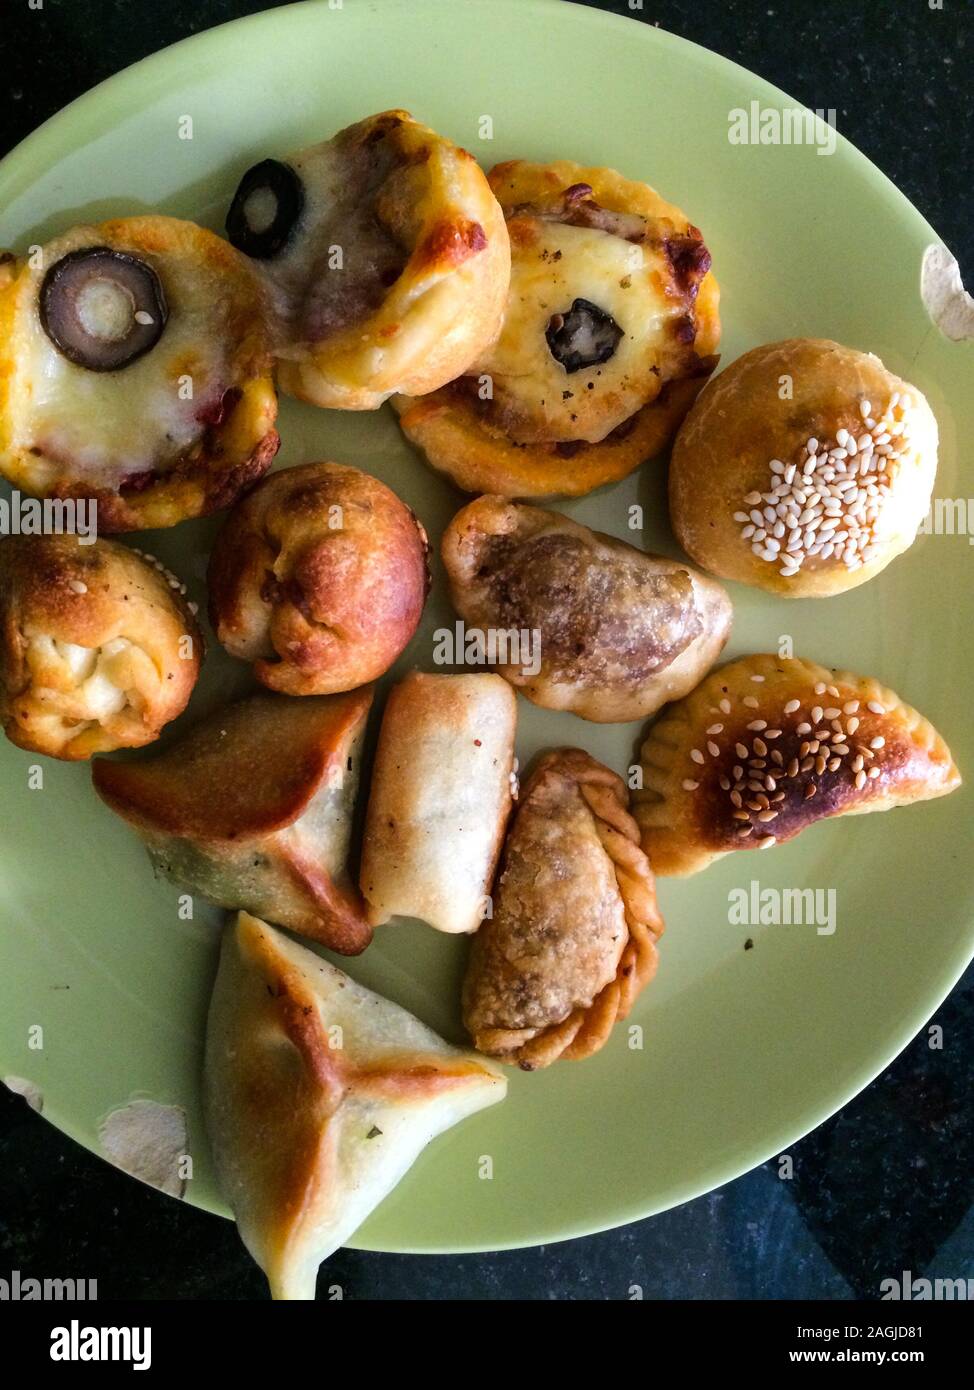 Close up still life of Lebanese pastries on a green ceramic plate. Stock Photo